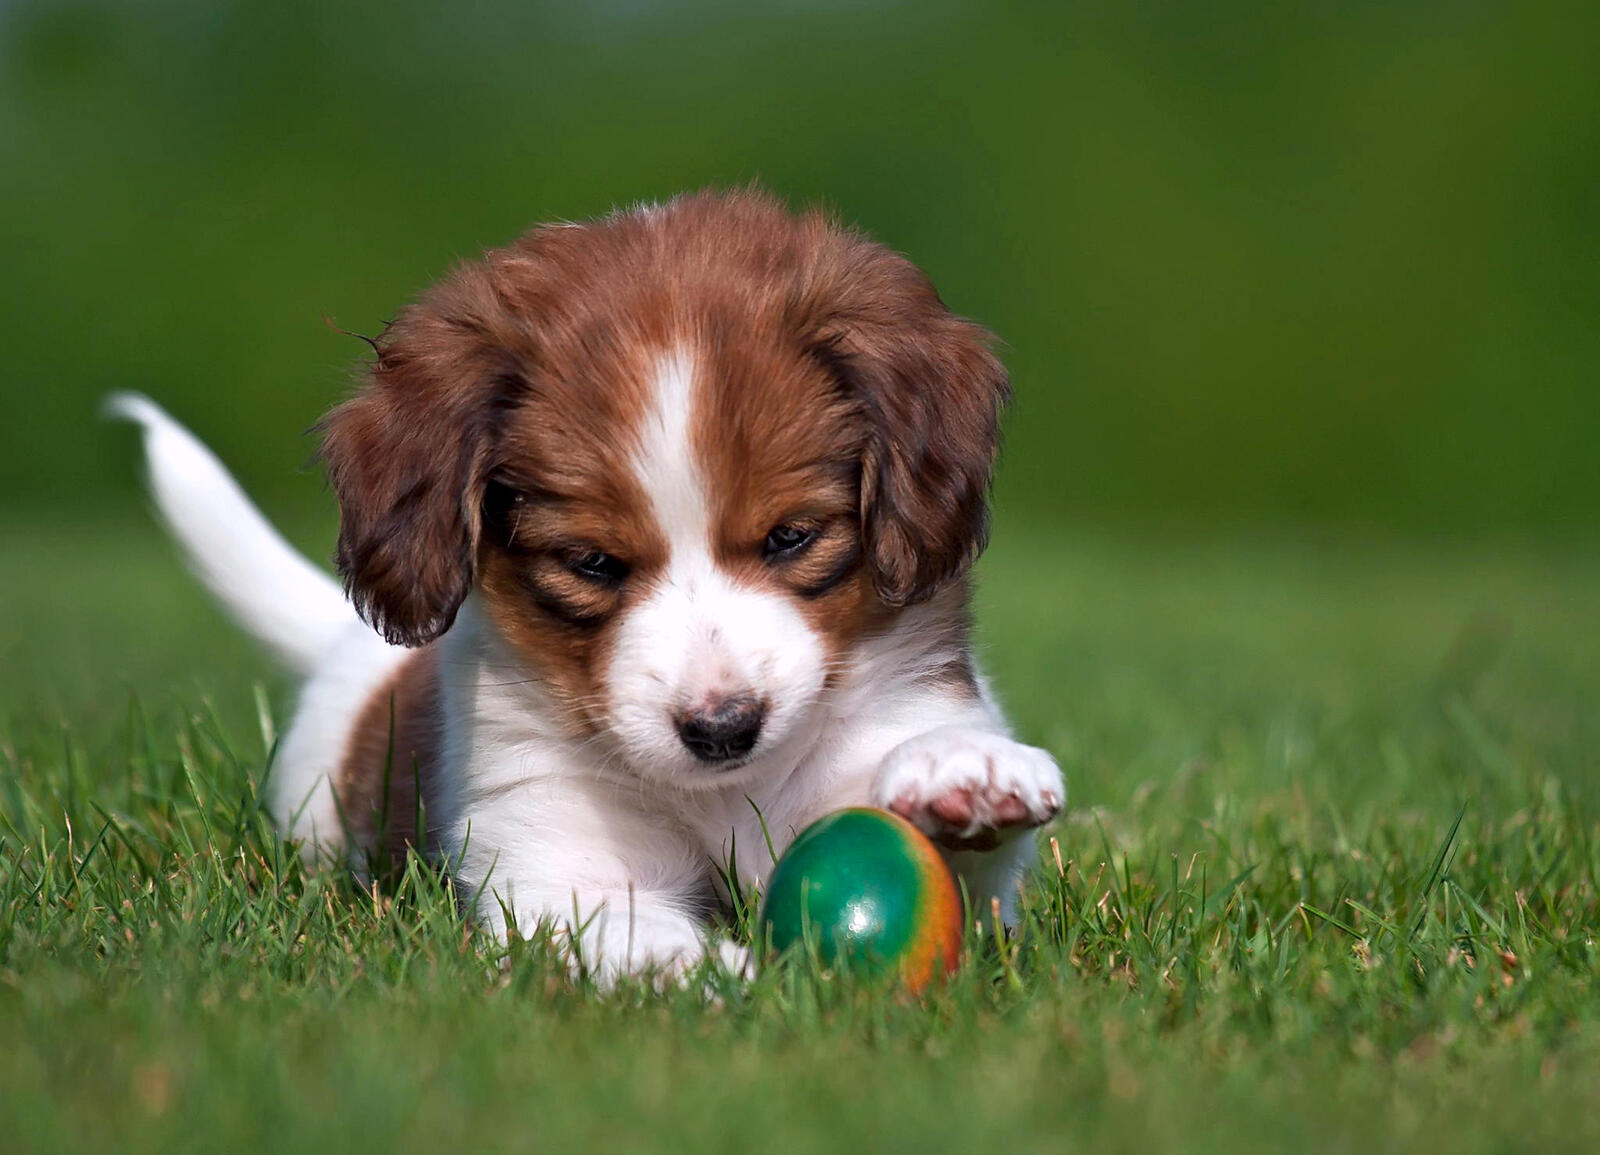 Wallpapers dog playing with a ball on the desktop